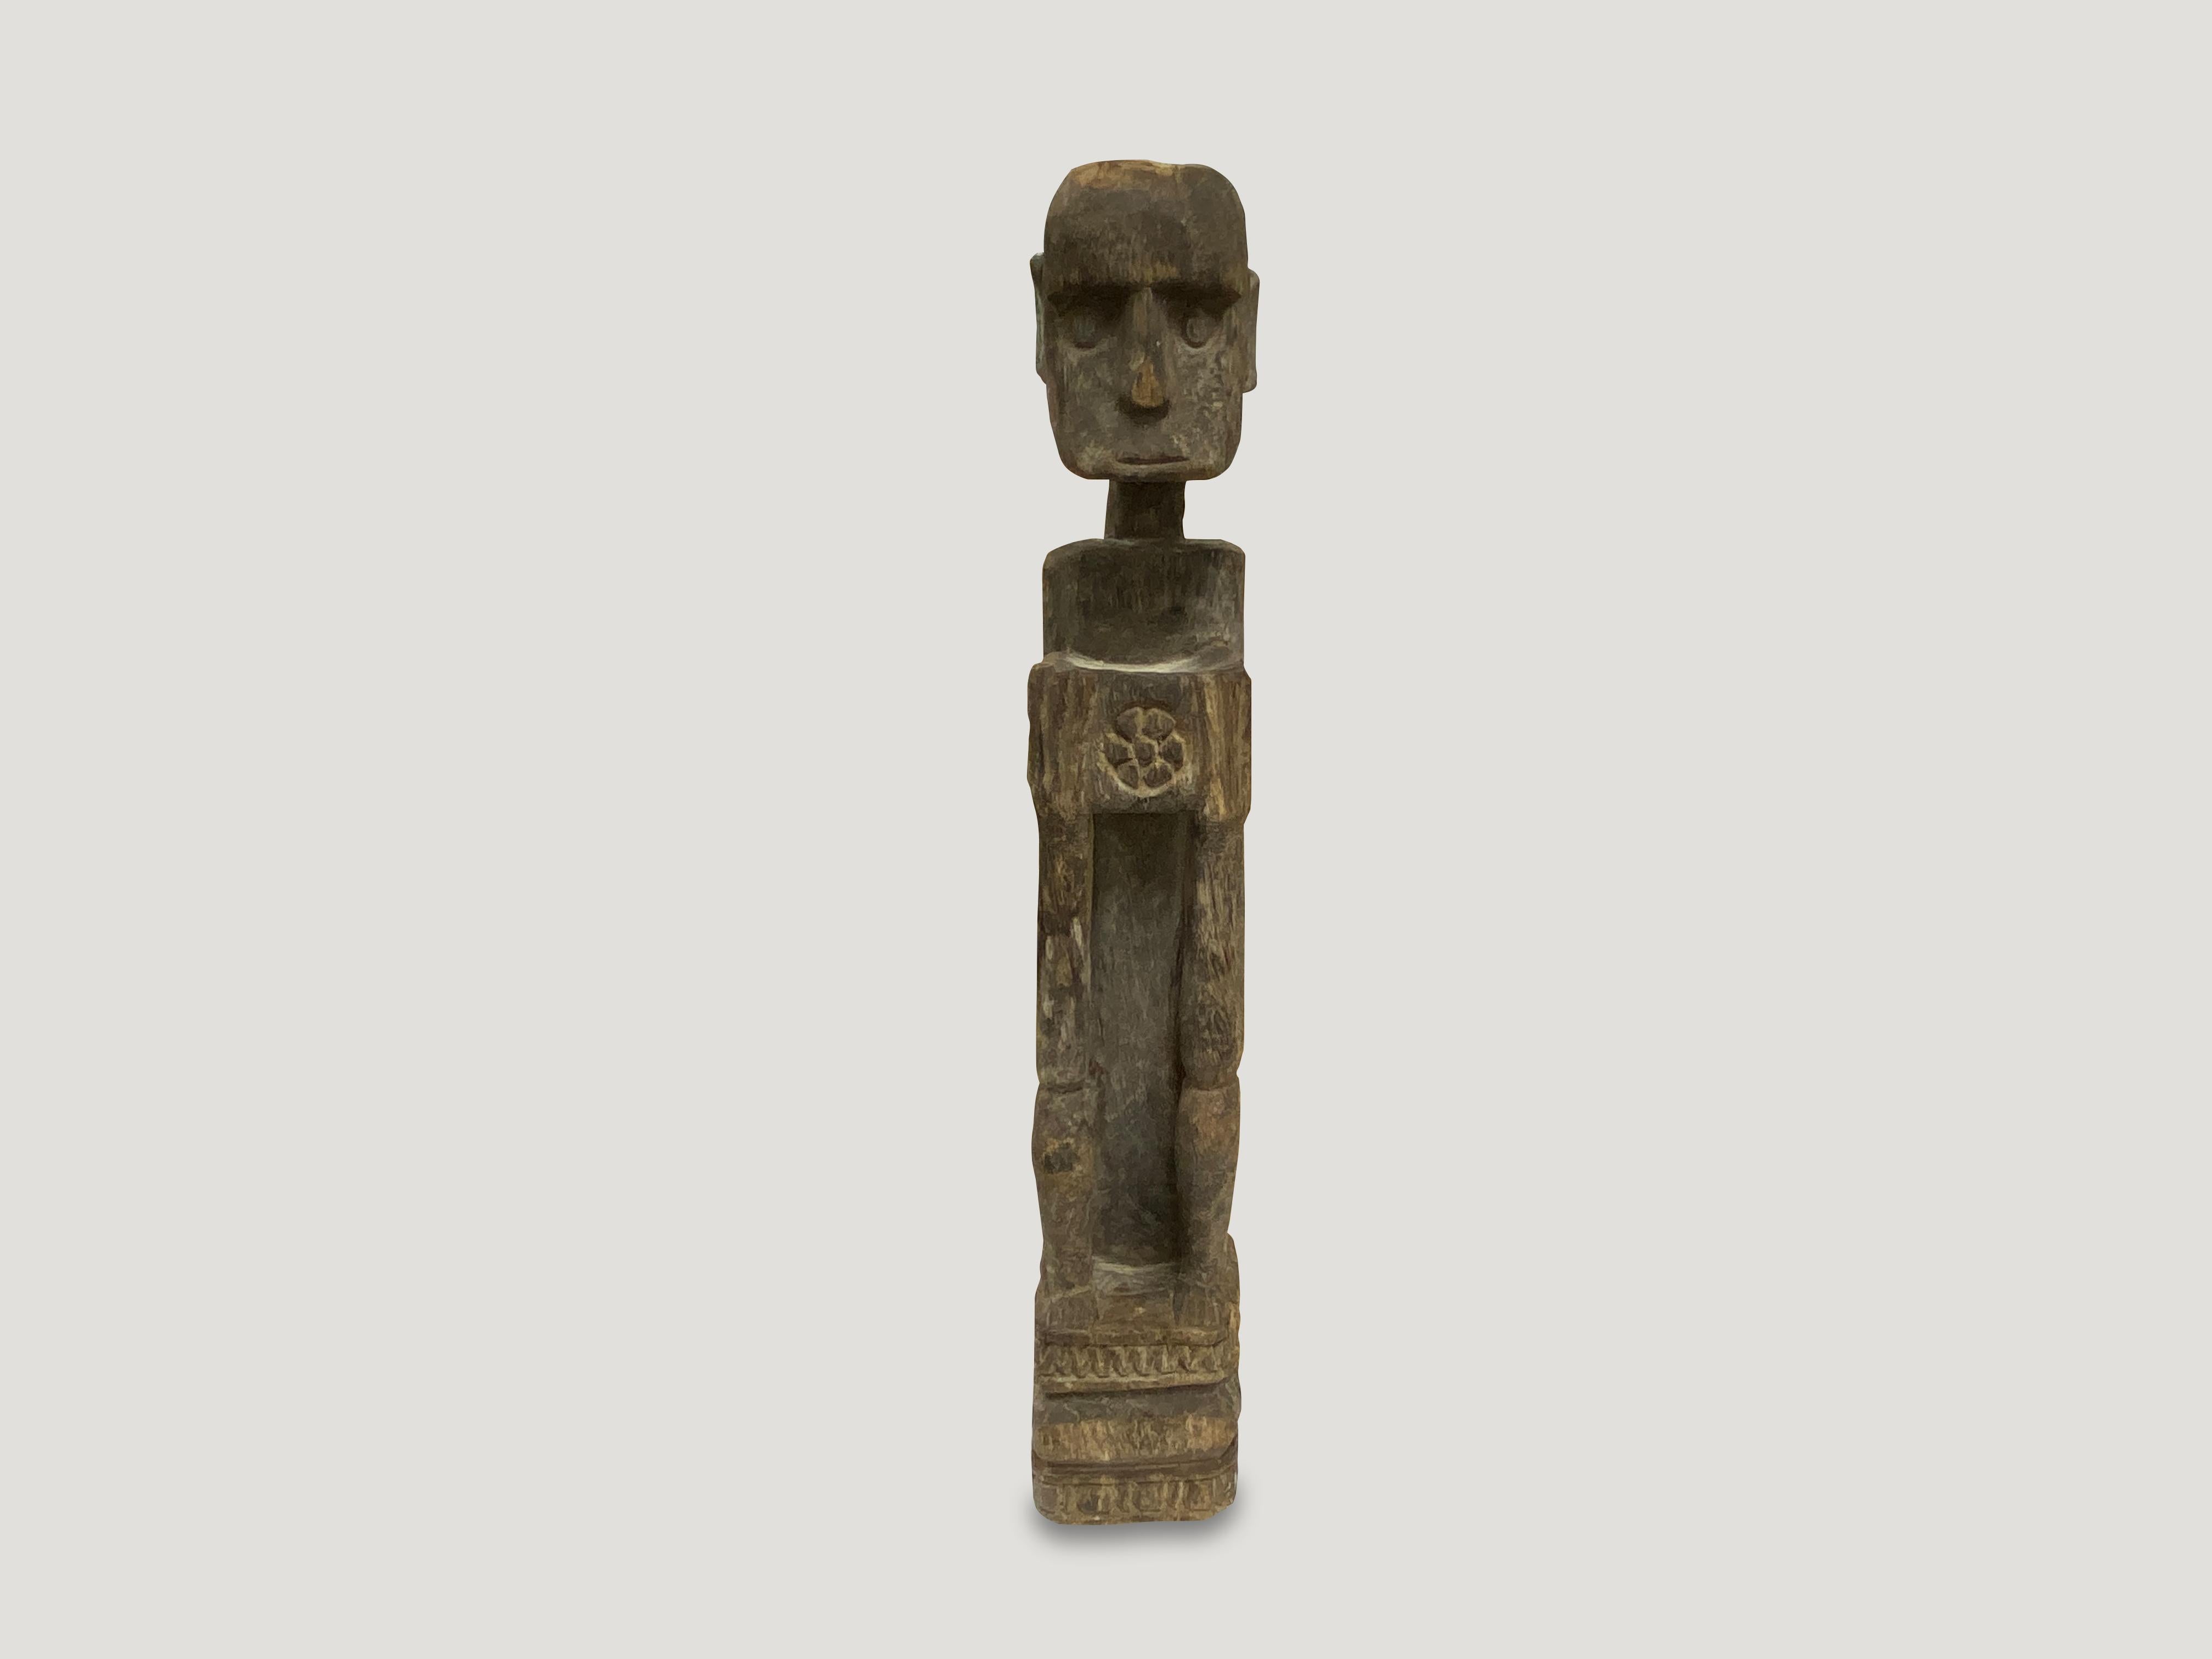 Antique hand carved statue of a primitive man from Sumatra, holding offerings. 

This statue was sourced in the spirit of wabi-sabi, a Japanese philosophy that beauty can be found in imperfection and impermanence. It is a beauty of things modest